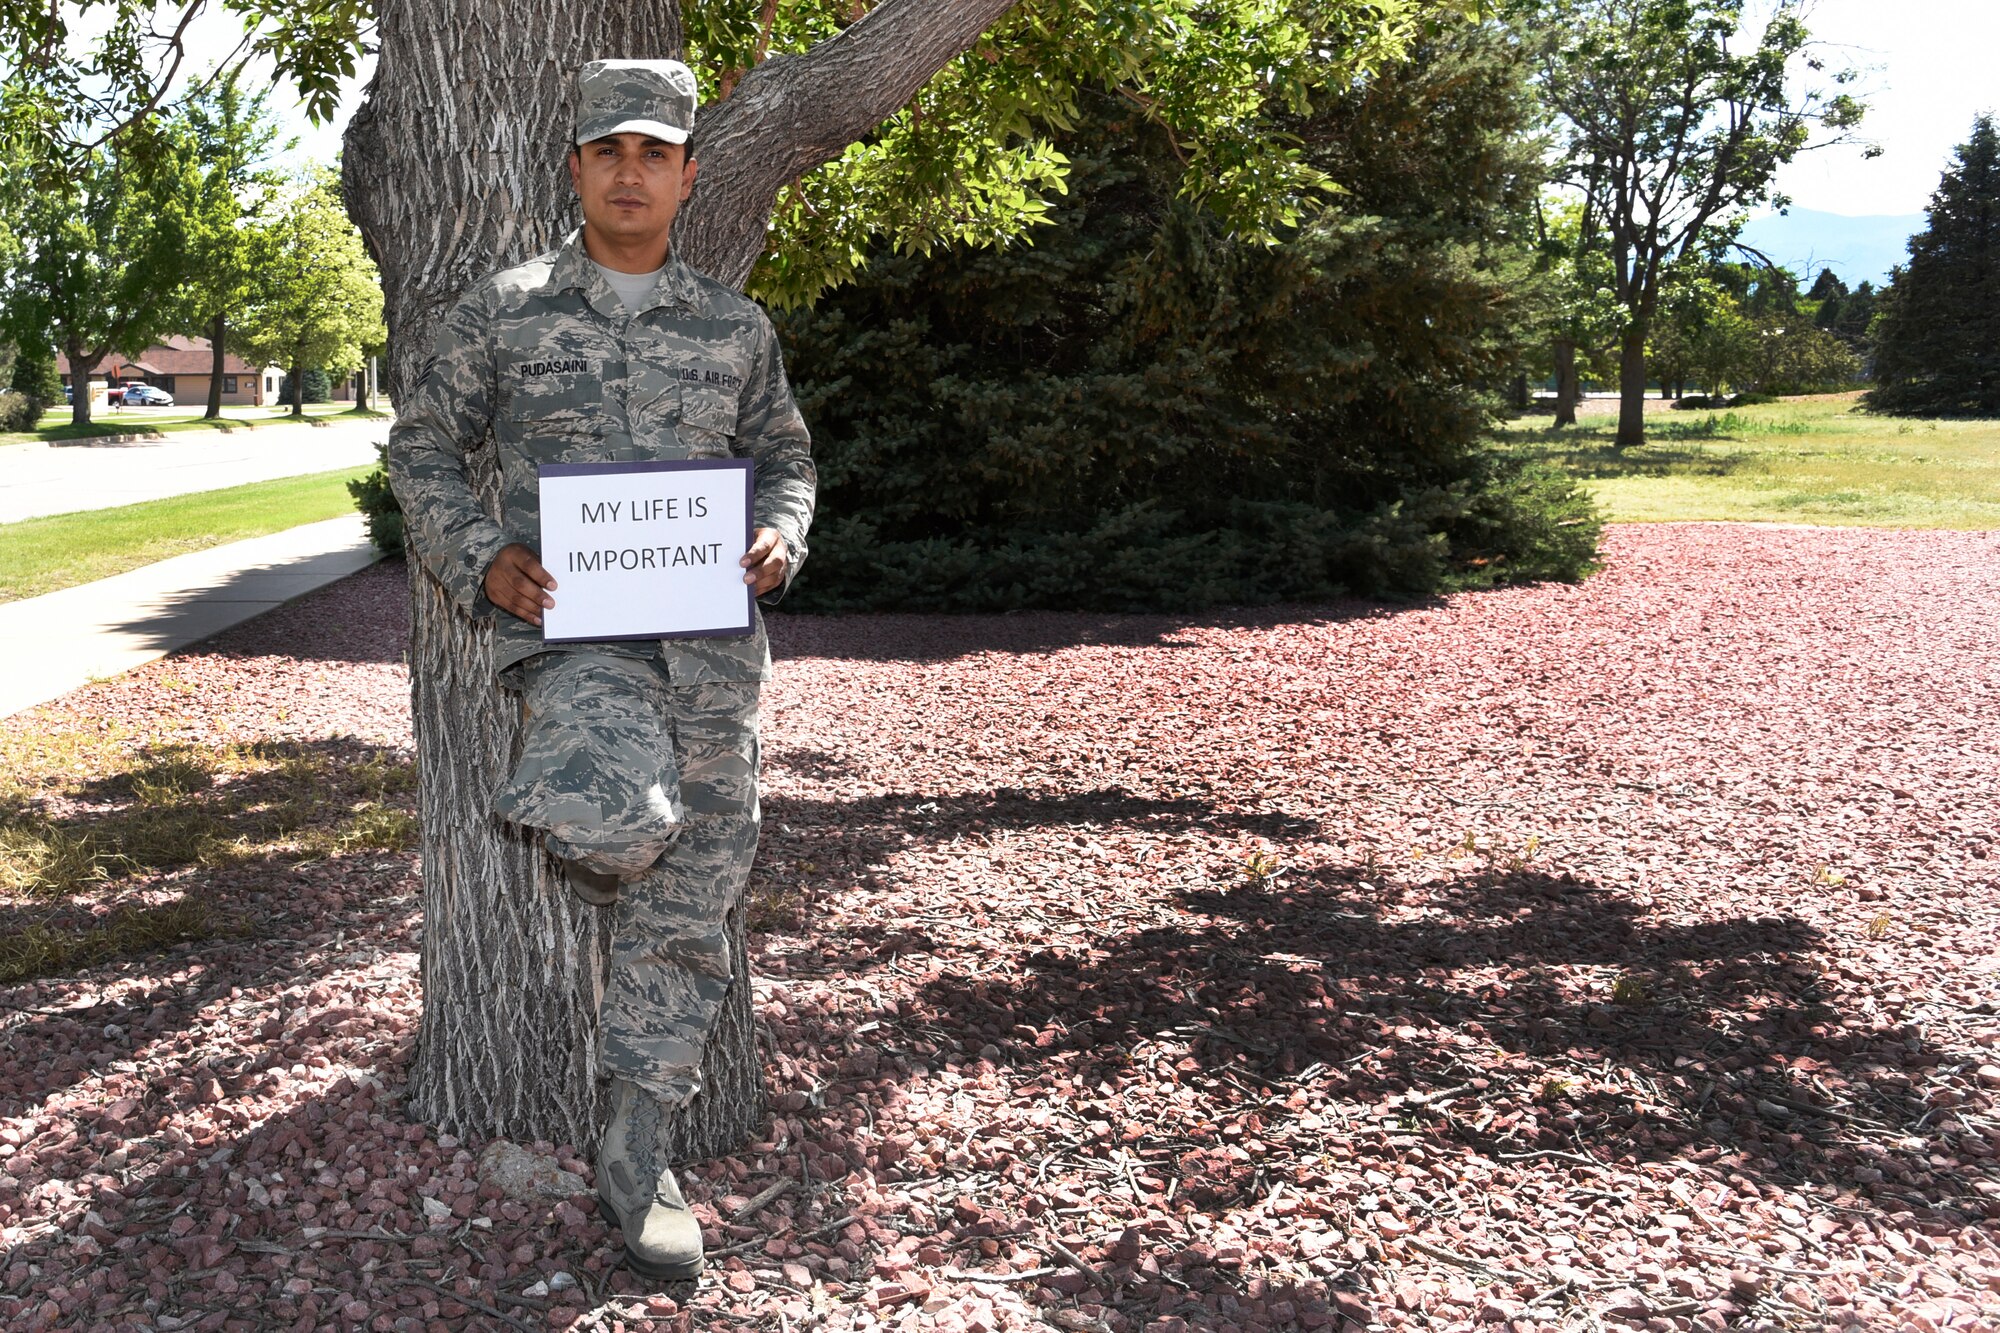 Staff Sgt. Gopal Pudasaini, 21st Medical Operations Squadron family health clinic patient advocate, tells the story of his experience with suicide and how it affected his life, June 28, 2019 at Peterson Air Force Base, Colorado. Pudasaini wants others to know that life is an opportunity, don’t waste it. (U.S. Air Force photo by Staff Sgt. Alexandra M. Longfellow)